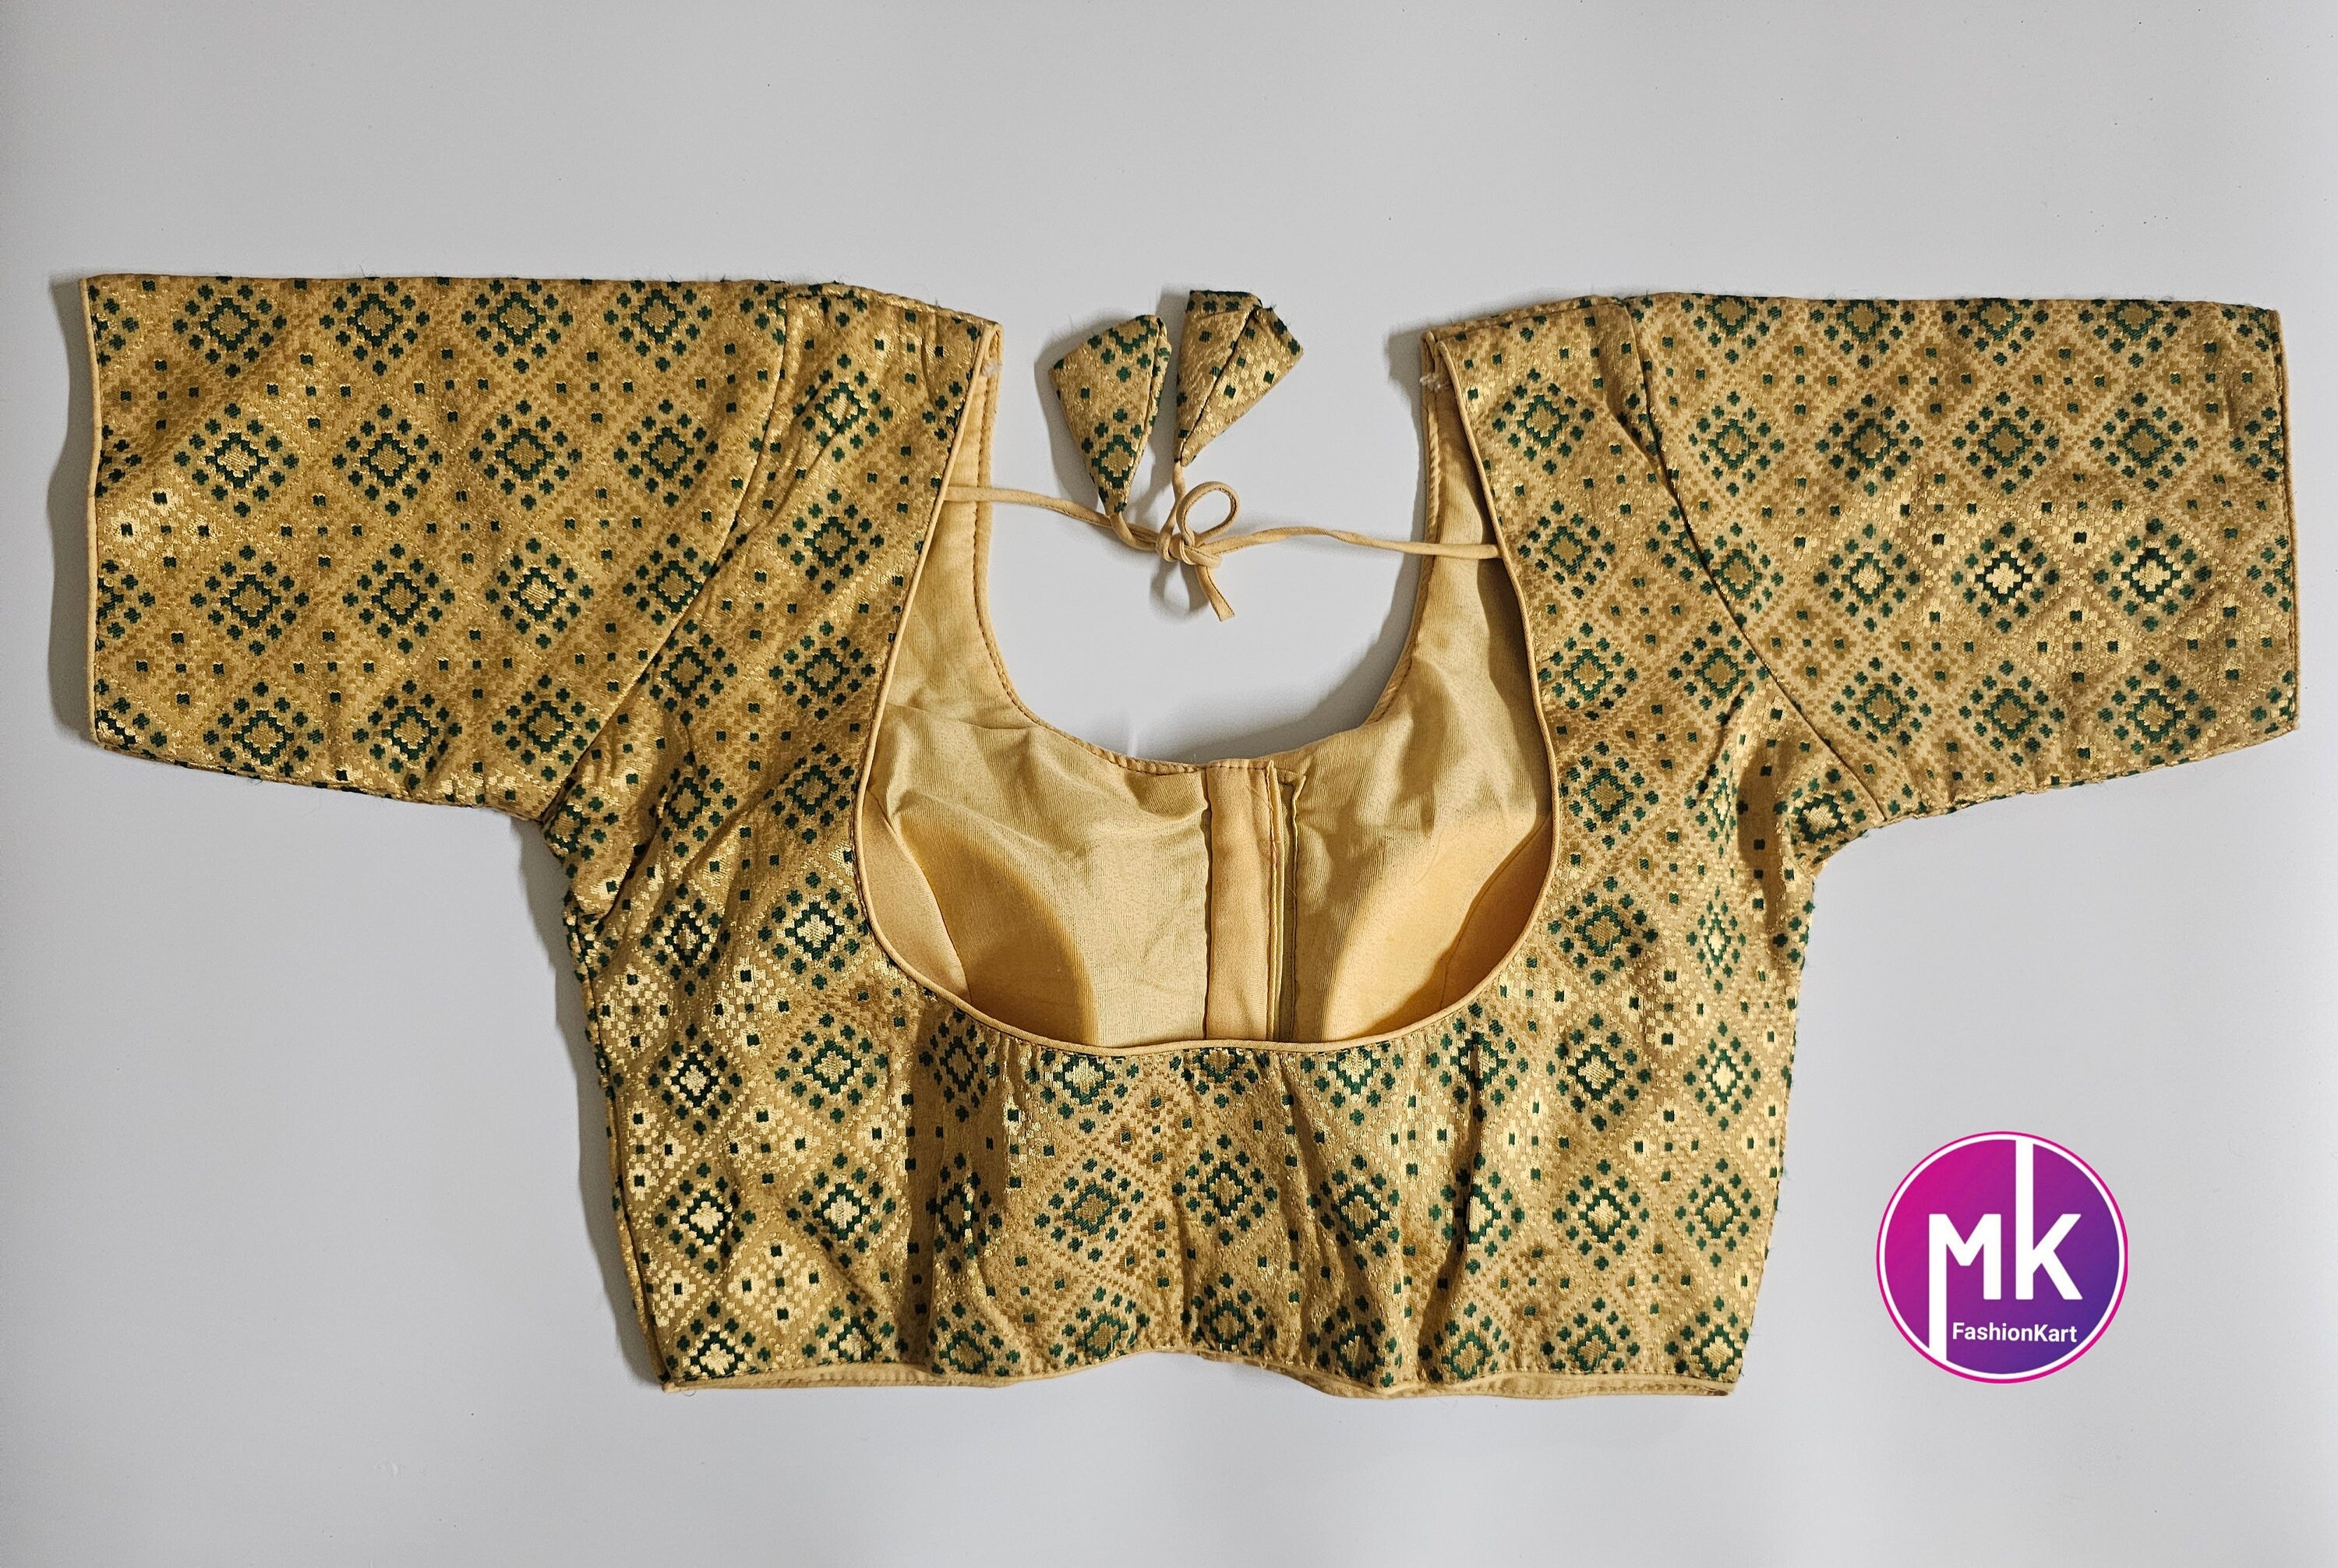 Readymade Saree Blouse - Golden with Green color design Blouse - Princess cut padded - size 36" (Upto 38")